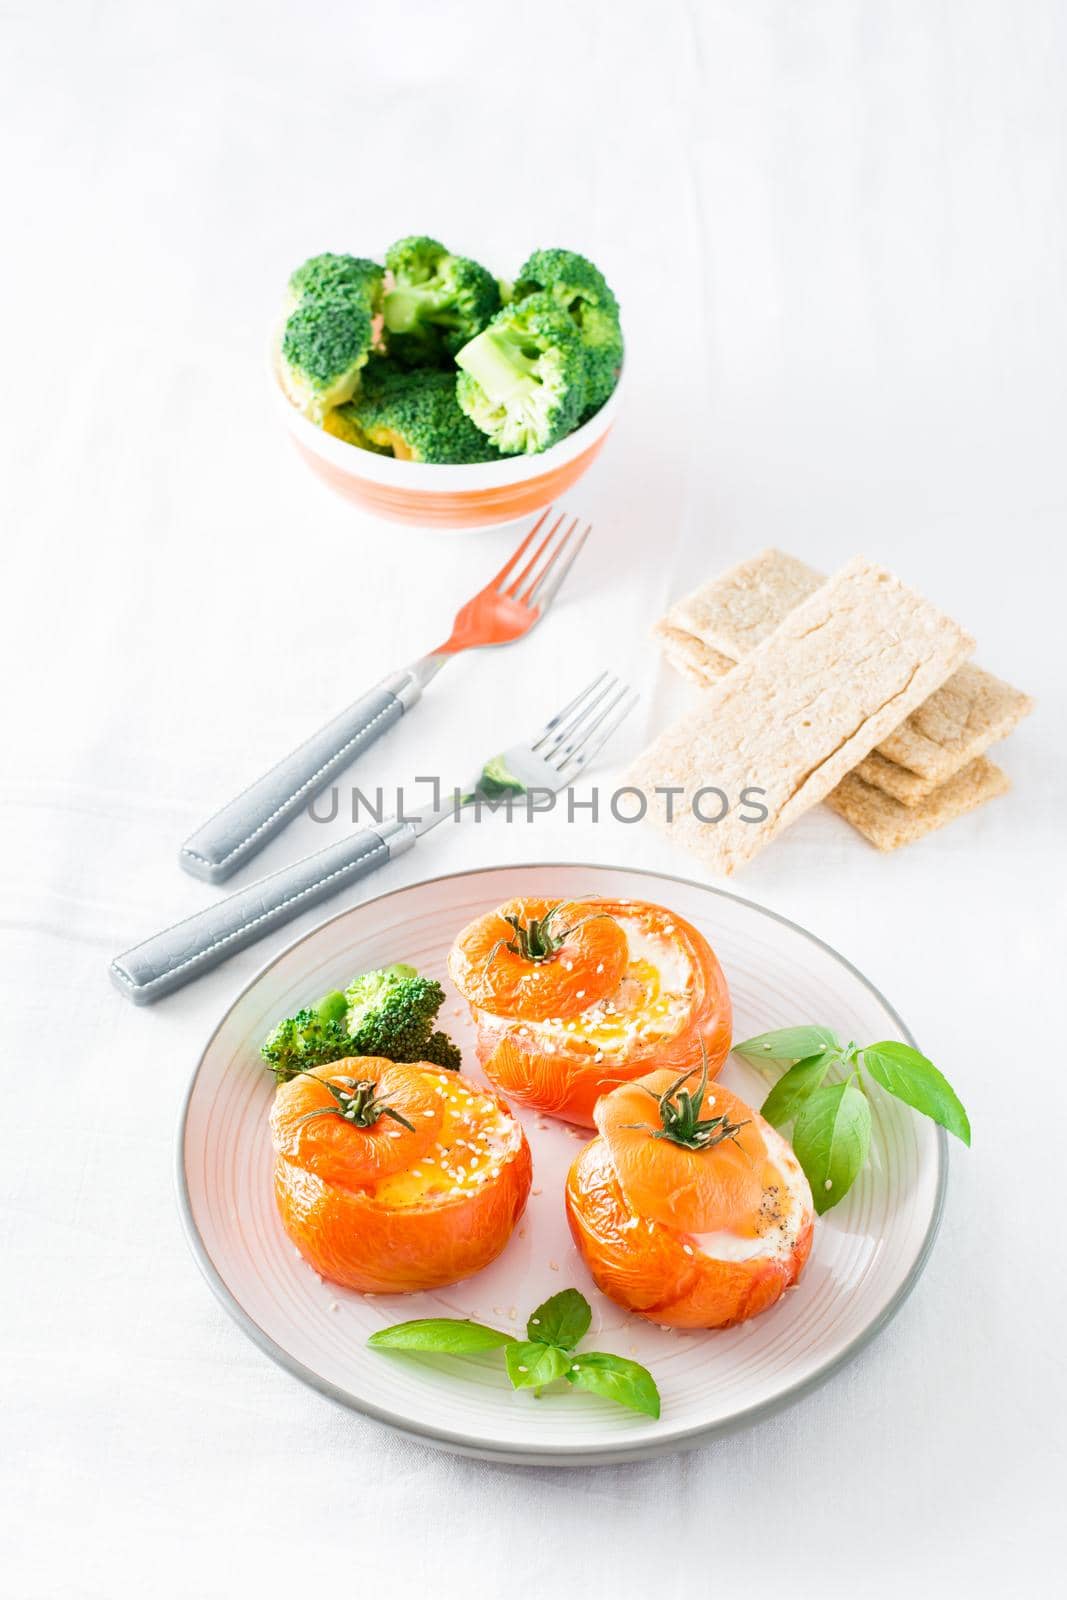 Baked tomatoes with egg, broccoli and basil leaves on a plate. Diet lunch. Vertical view